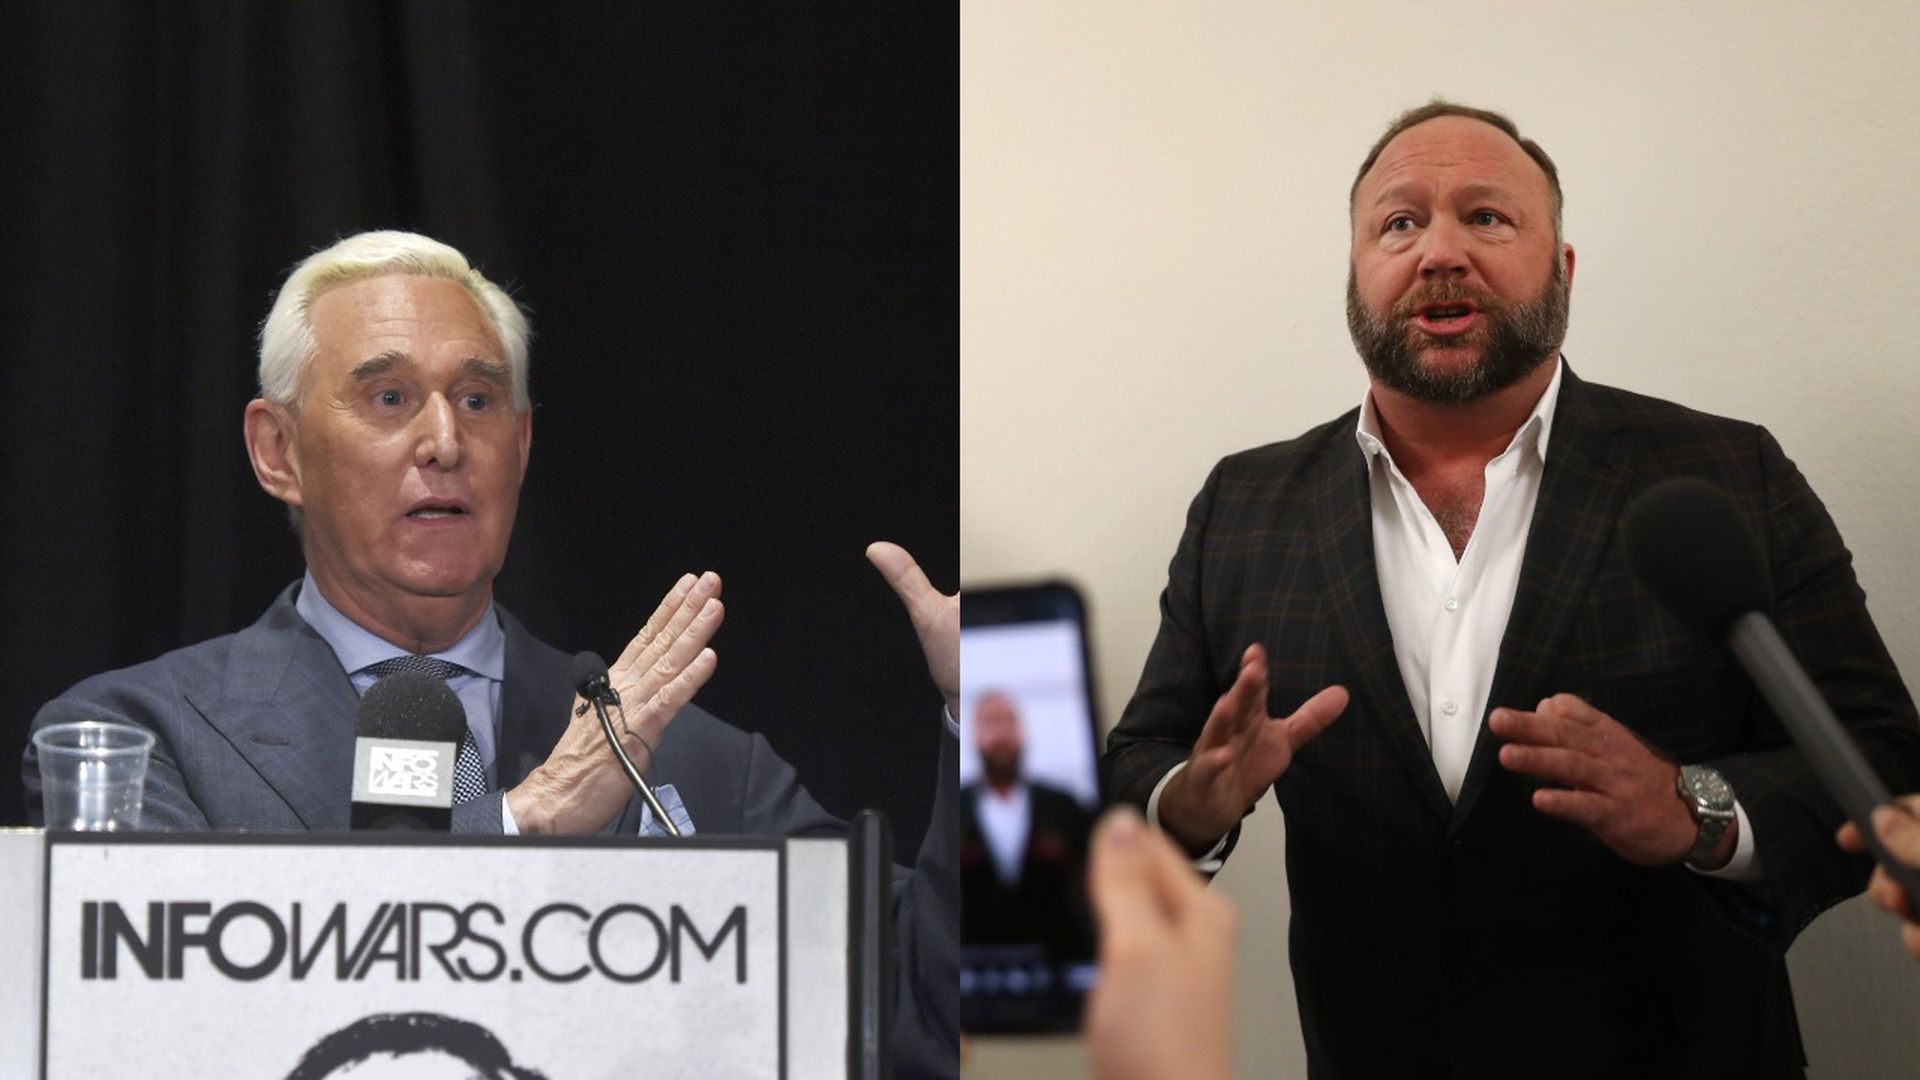 Photo of Roger Stone on the left and Alex Jones on the right